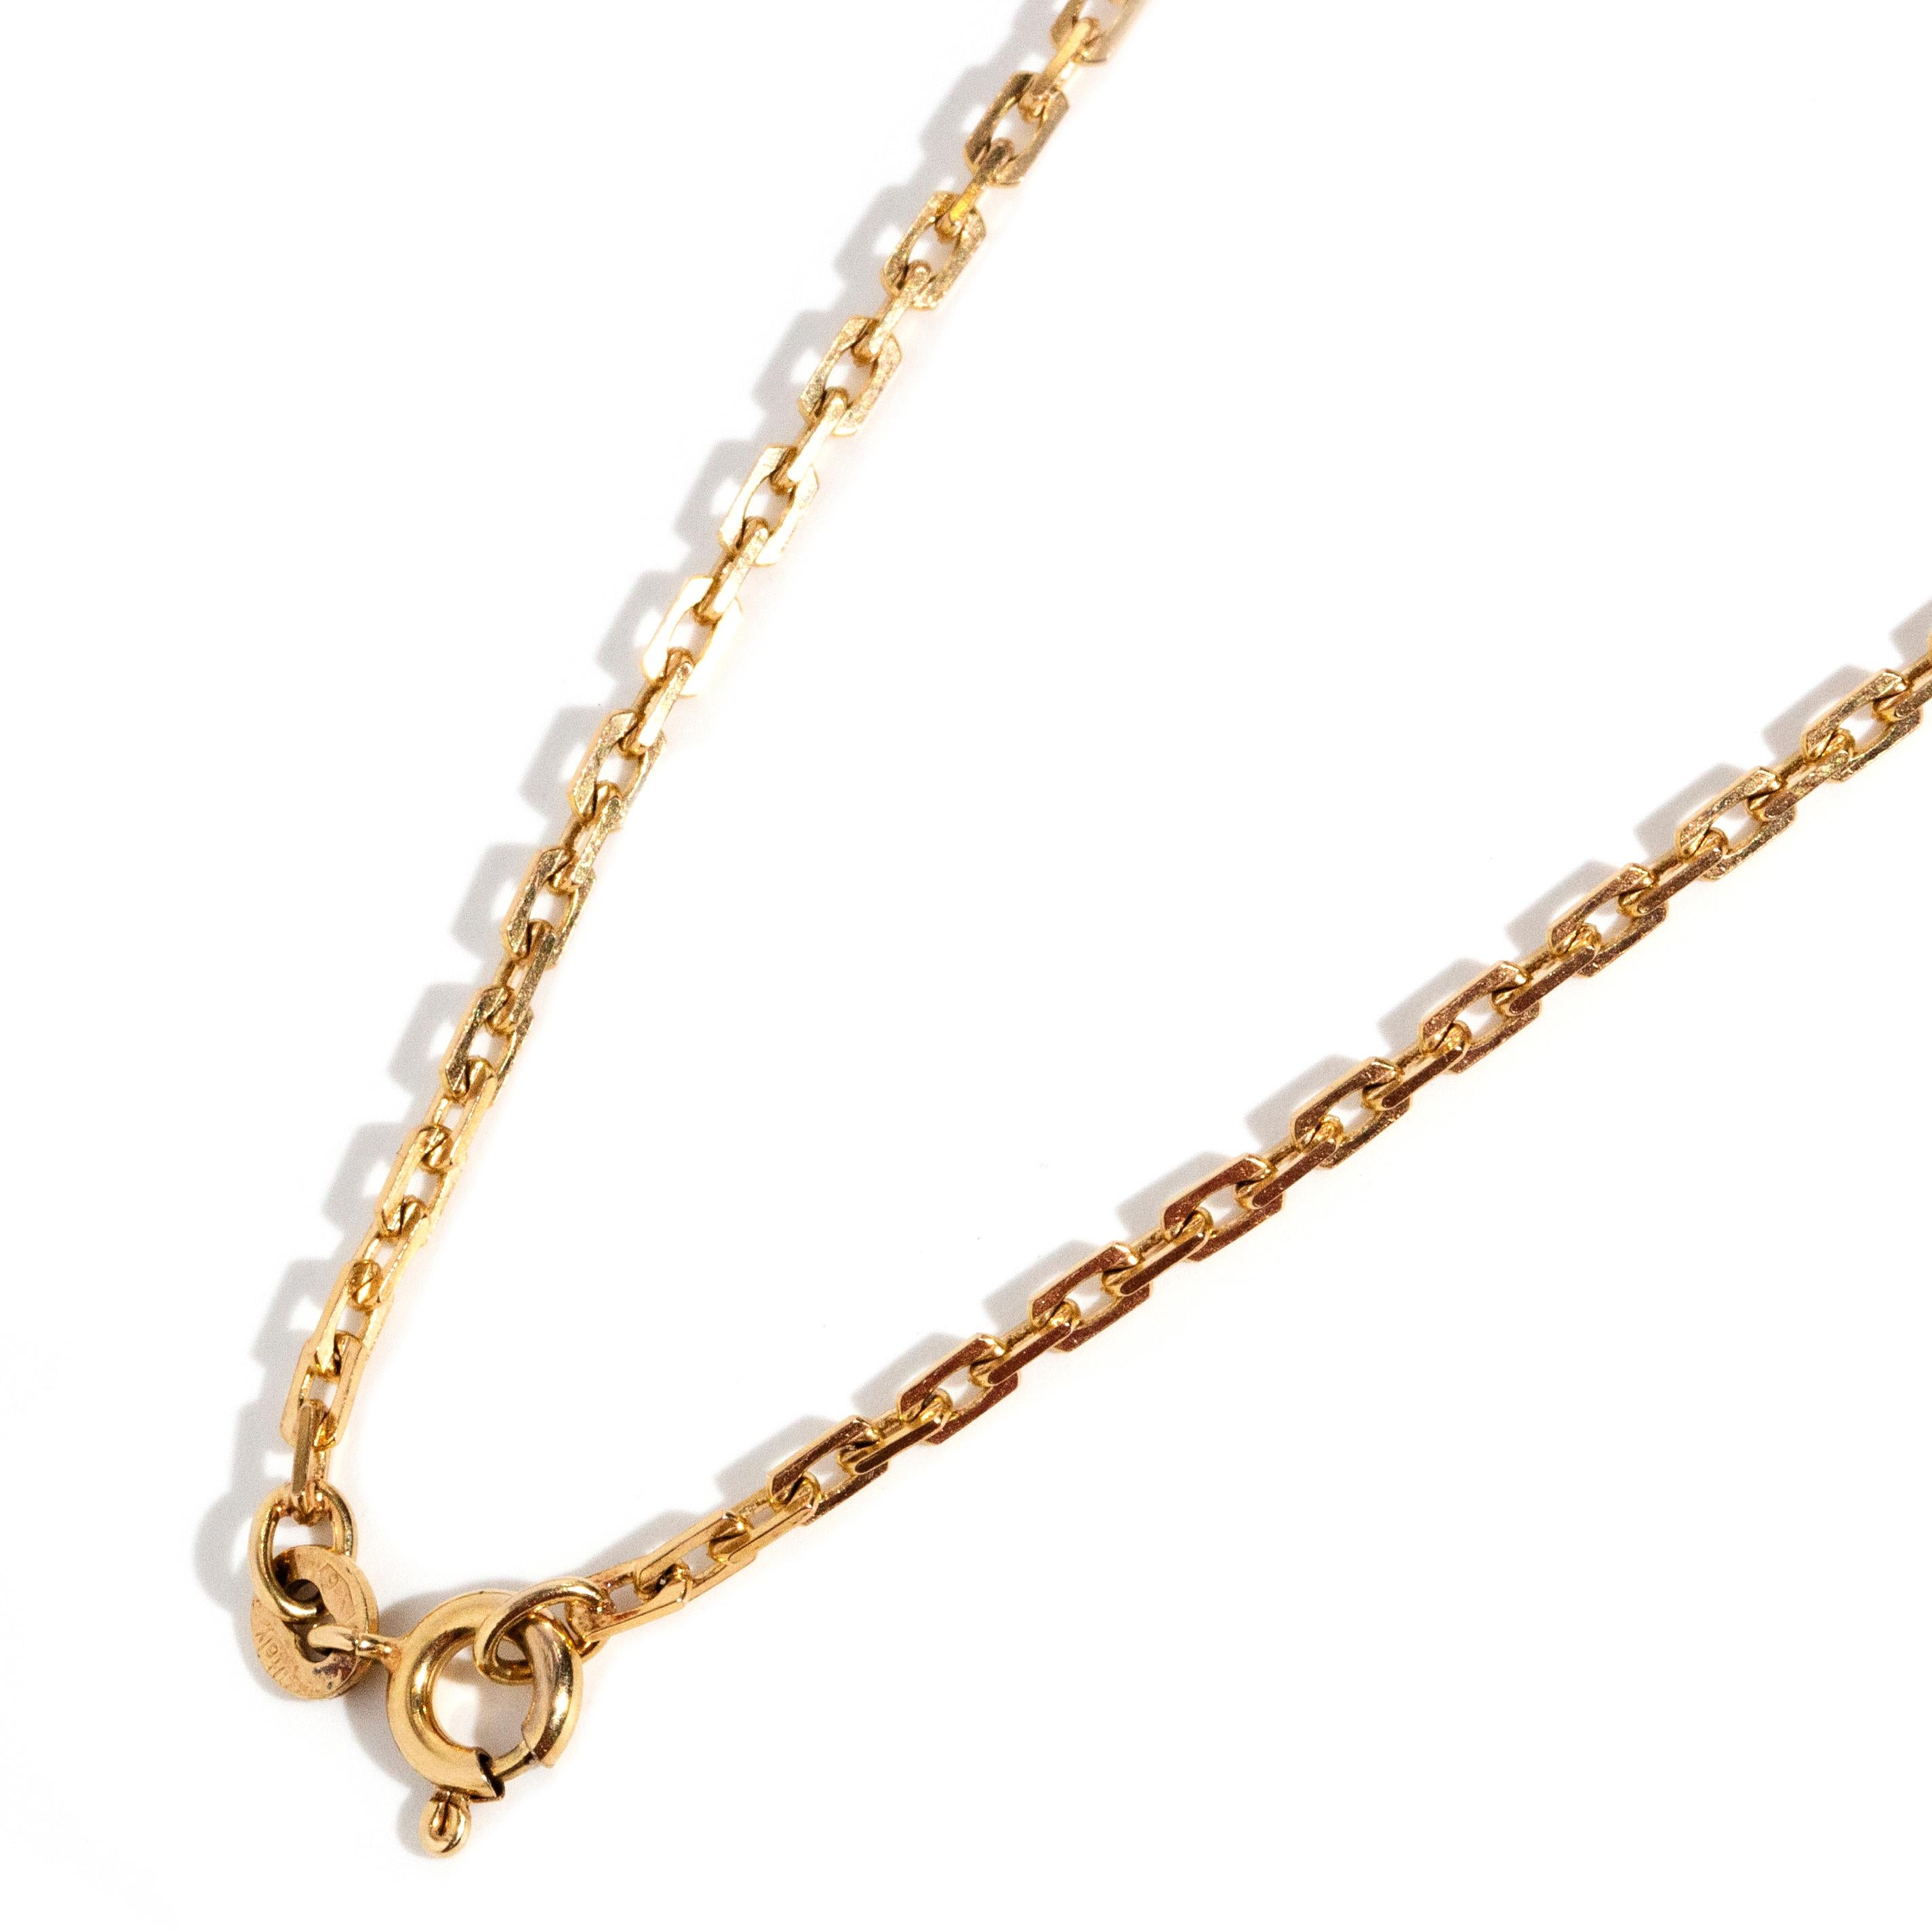 Modern Vintage Circa 1990s Rectangular Cable Link Greek Chain 9 Carat Yellow Gold For Sale